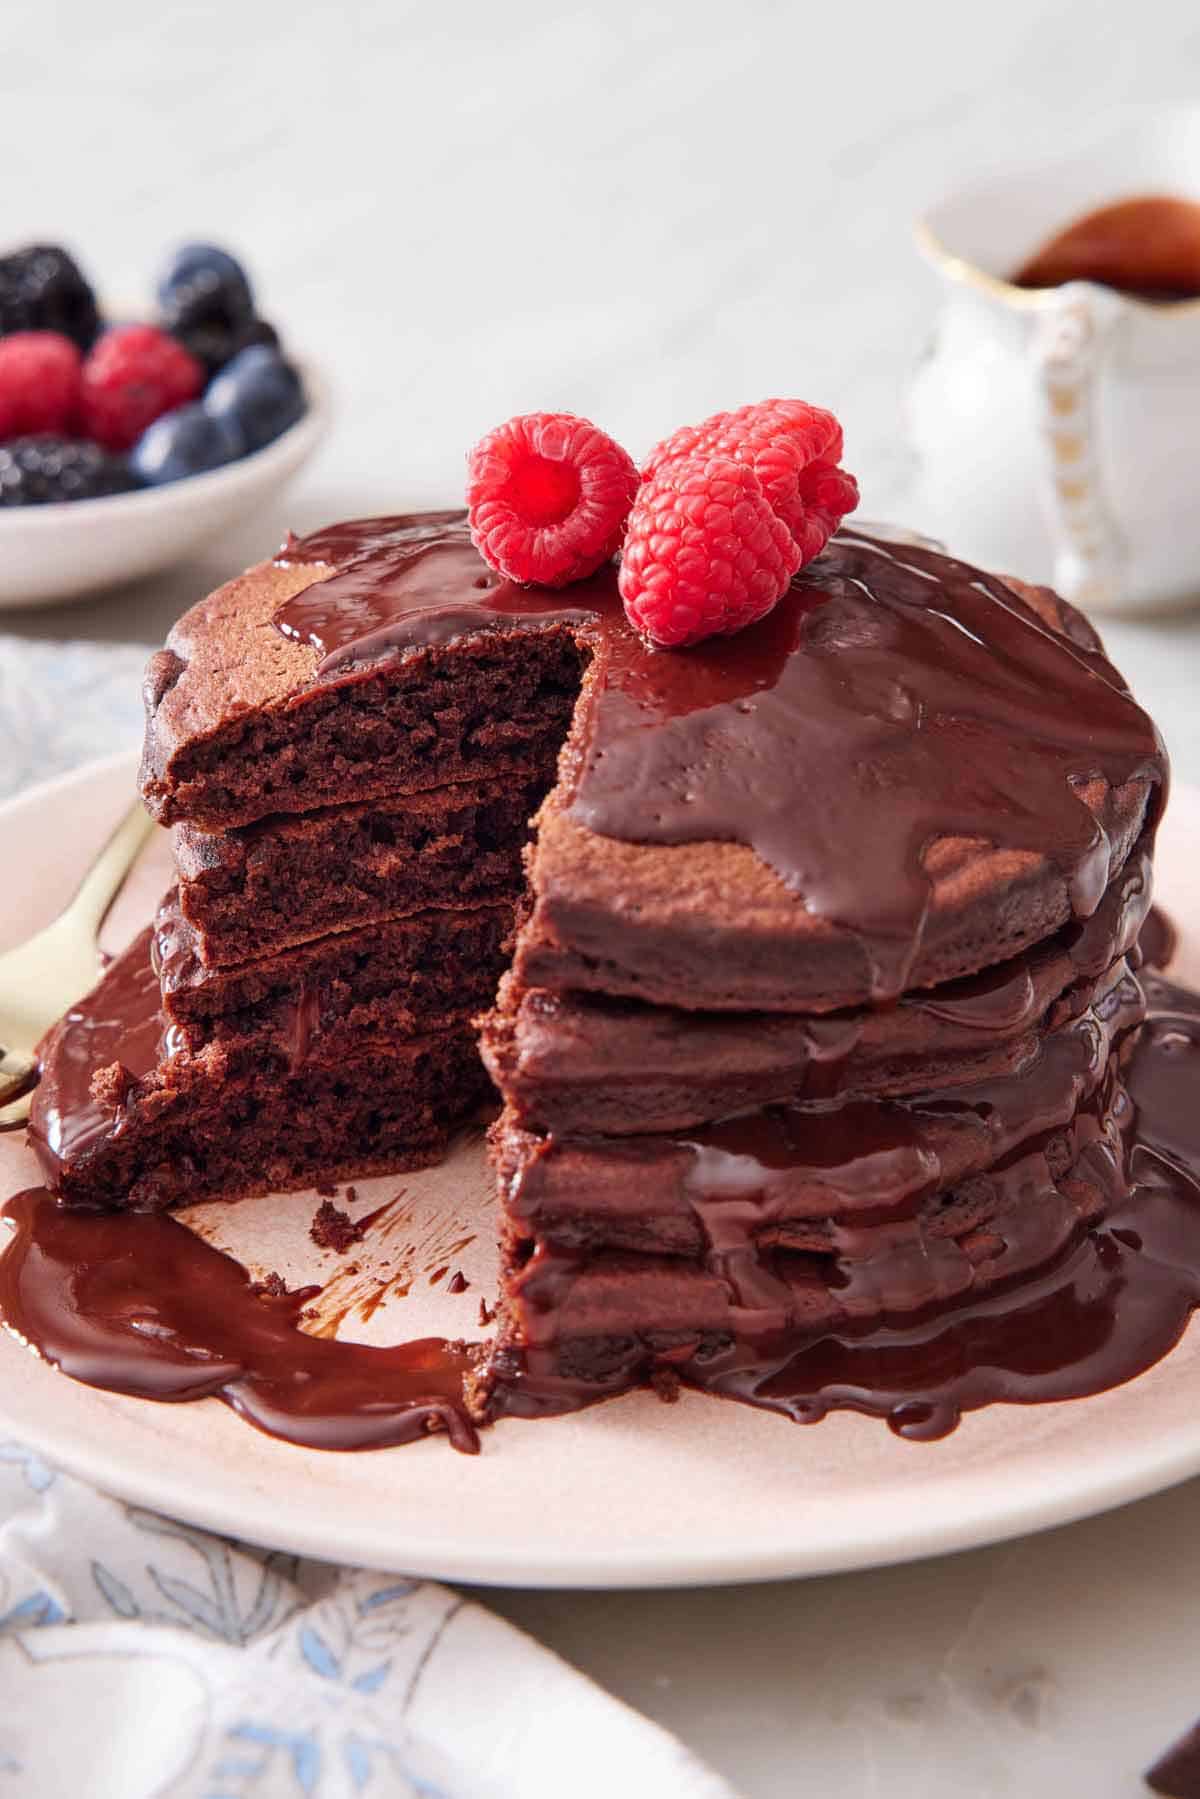 A stack of chocolate pancakes topped with chocolate sauce and raspberries with a fifth cut out.